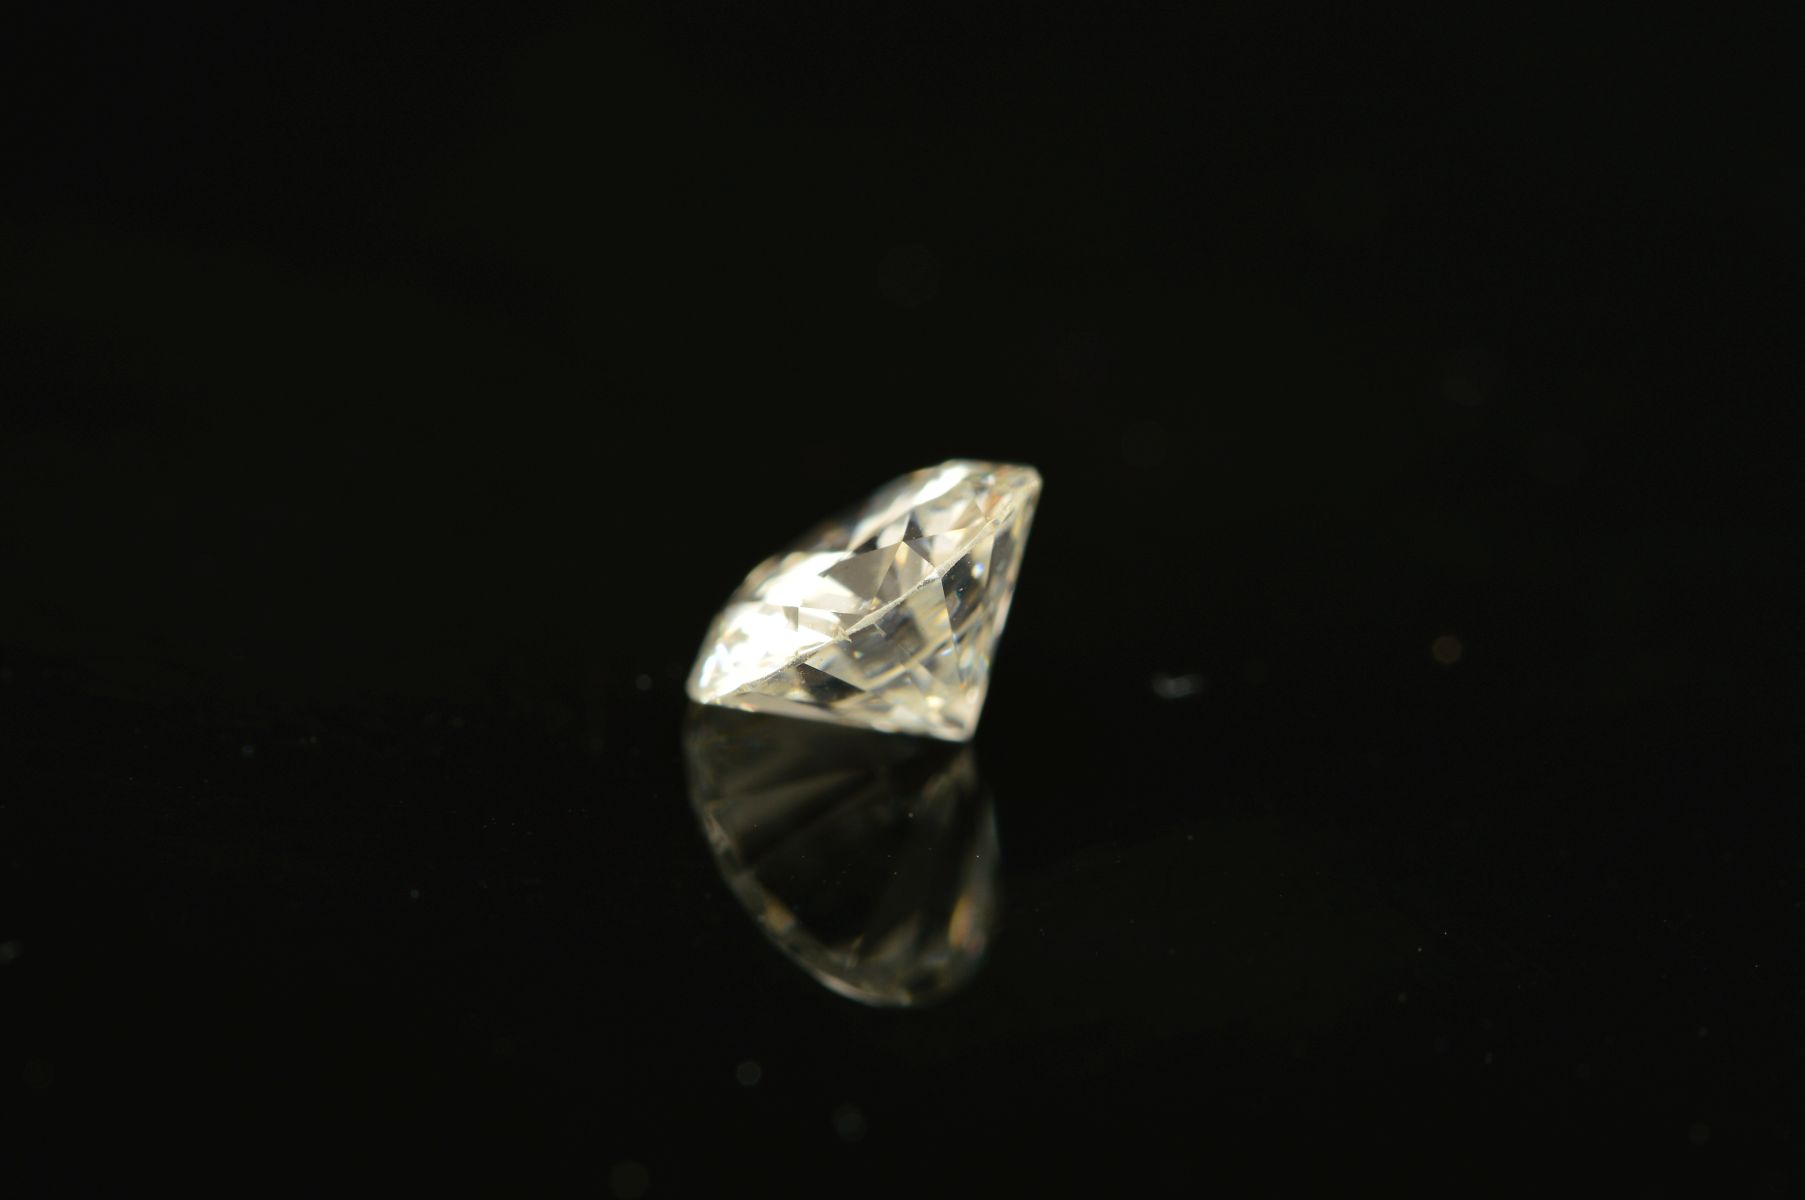 A BRILLIANT CUT DIAMOND, approximately 0.51ct, clarity assessed as VS1-VS2, colour assessed as E-F - Image 2 of 2